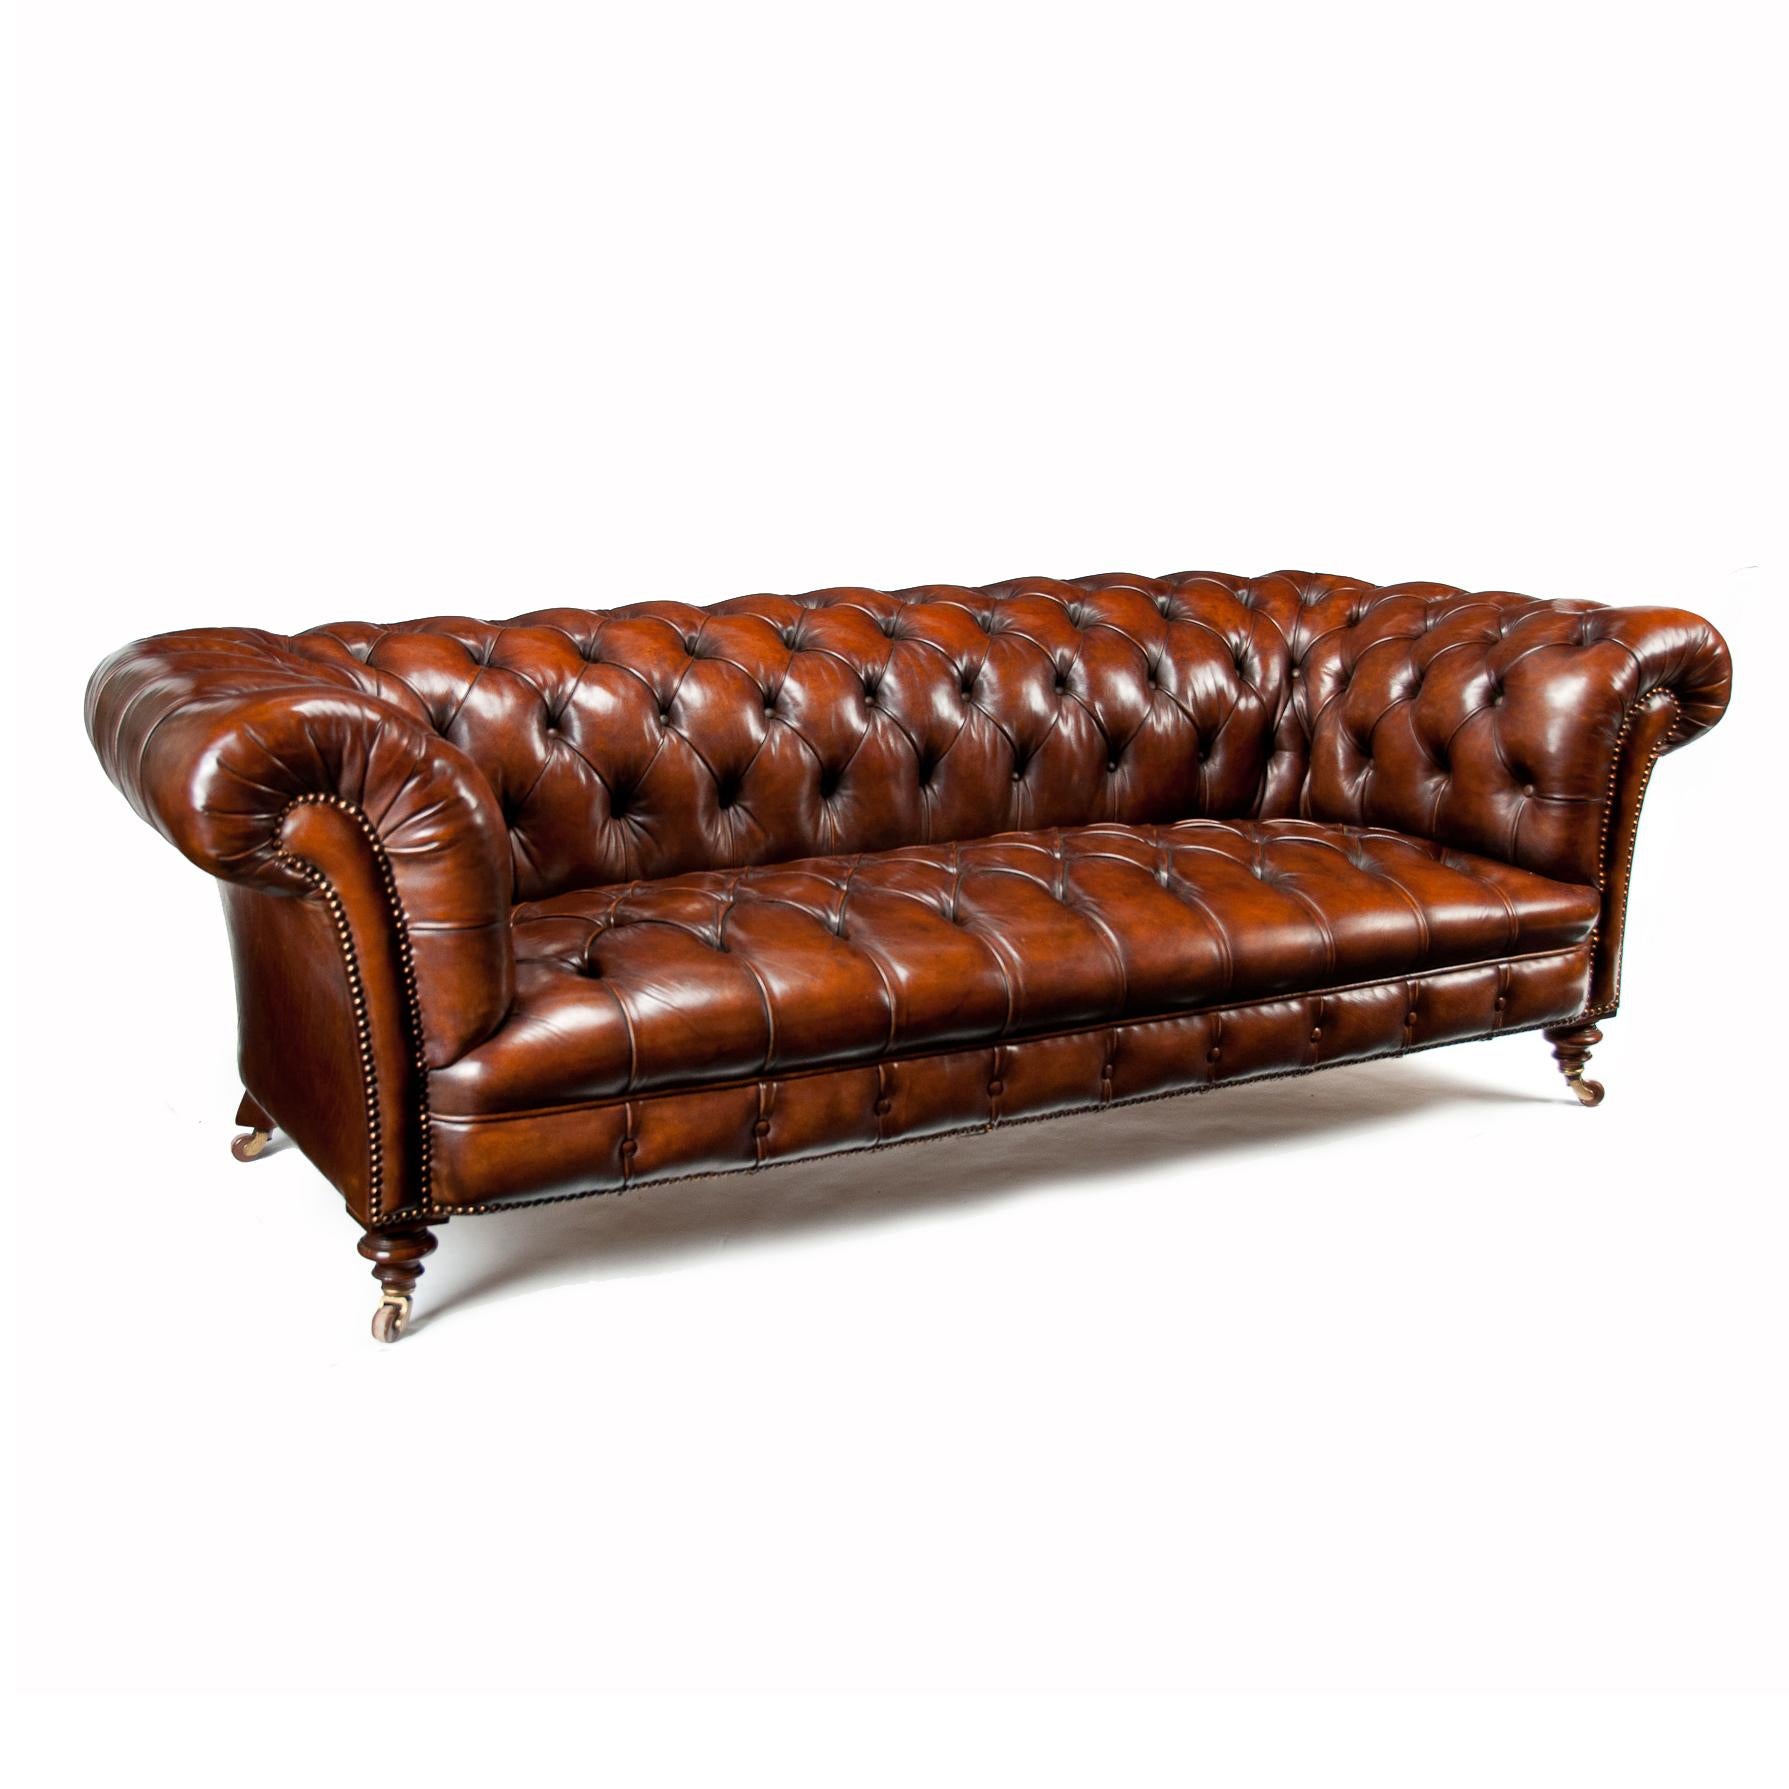 Wonderful 19th Century Deep Buttoned Leather Chesterfield by James Shoolbred 12